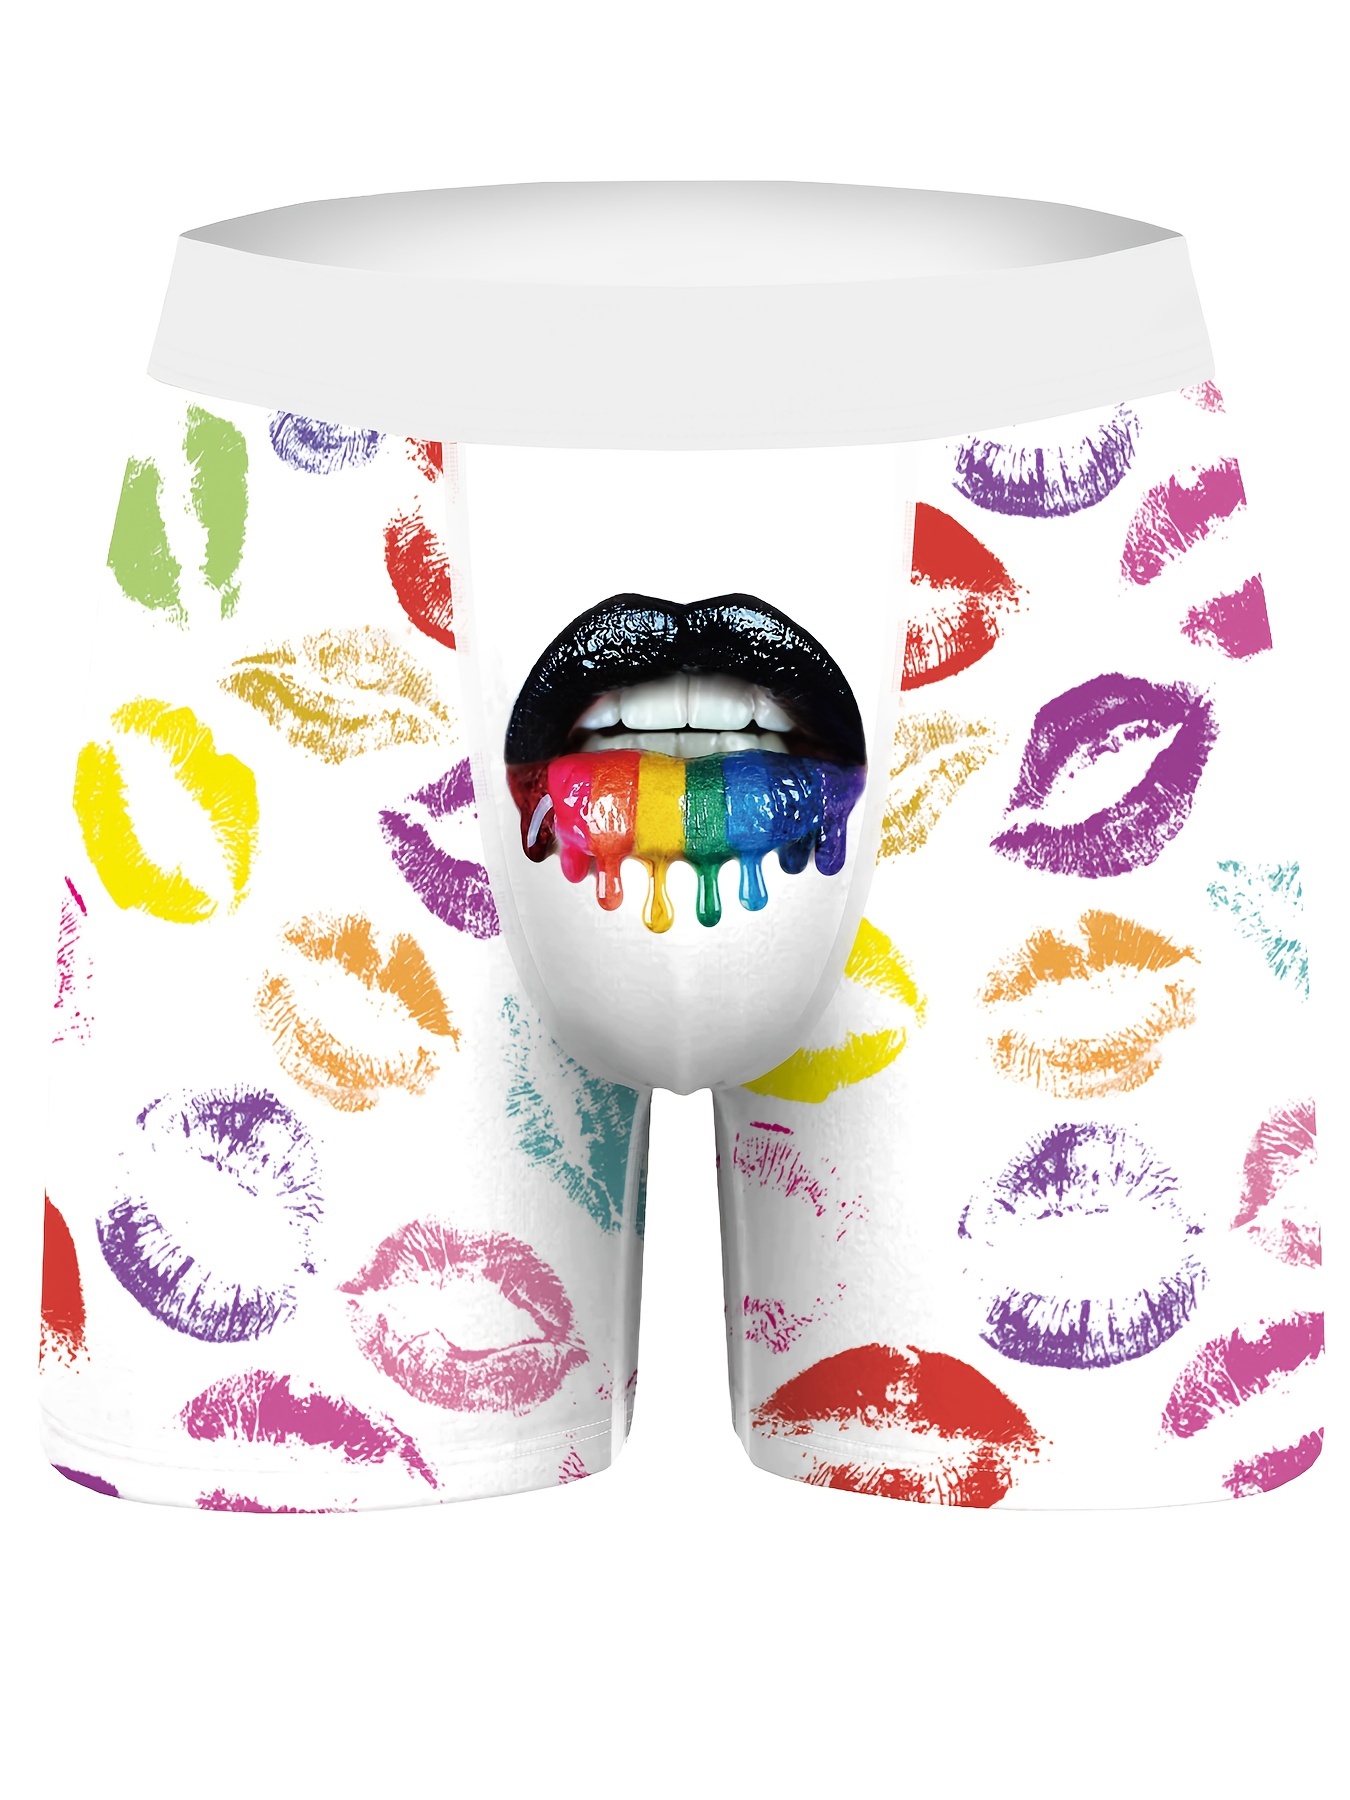 Funny Mens Boxer Briefs With Your Face Photo on Them and Text I Licked It so  Its Mine, Custom Underwear With Your Picture and Lips -  Canada